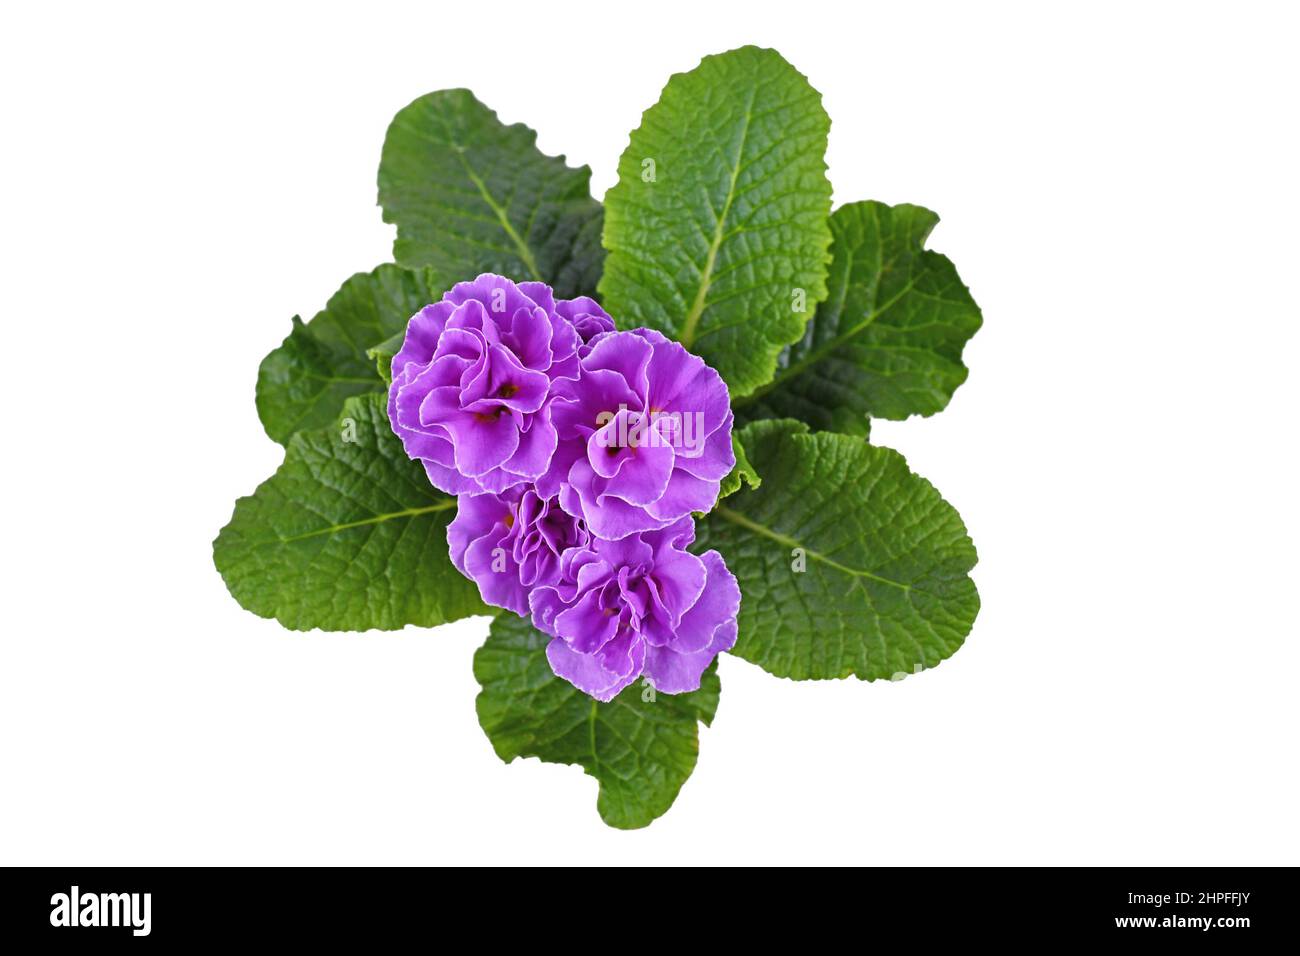 Top view of violet double primrose on white background Stock Photo